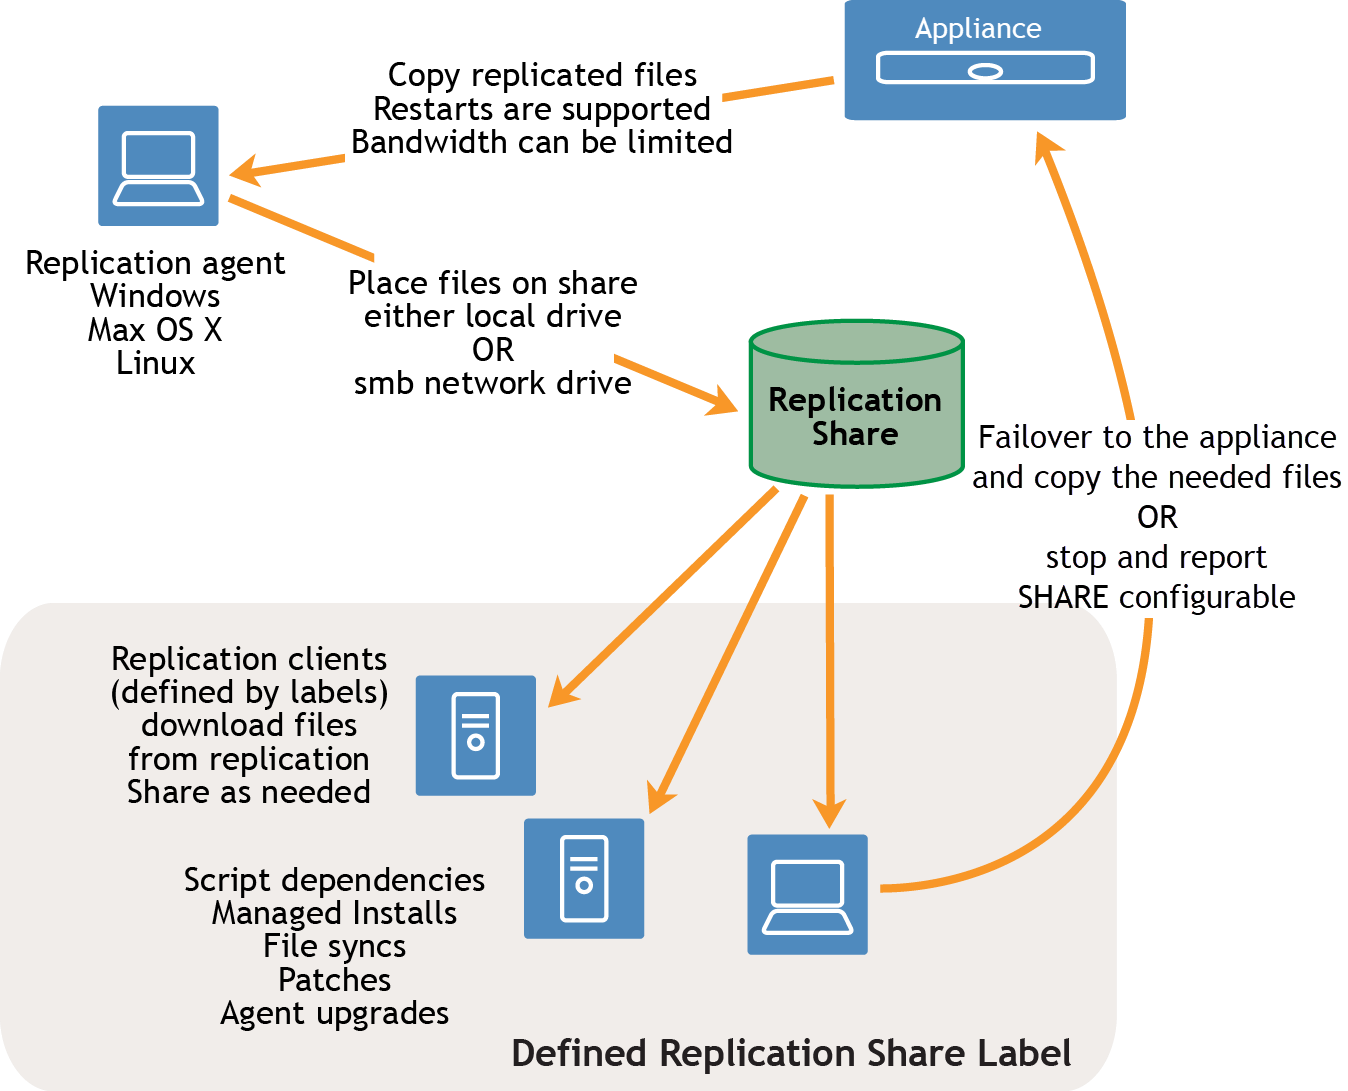 In the task flow, an arrow goes from a appliance to a Replication Agent. The arrow has a tag reading "copy replication files. Restarts are supported. Bandwidth can be limited. The Replication Agent can run be a Windows device, a Mac OS X device, or a Linux device. An arrow goes from the Replication Agent to the Replication Share. The has a tag reading "Place file on Share, either local drive or smb network drive." From the Replication Share, arrows go to various Replication Clients that are defined by a Replication Share Label.